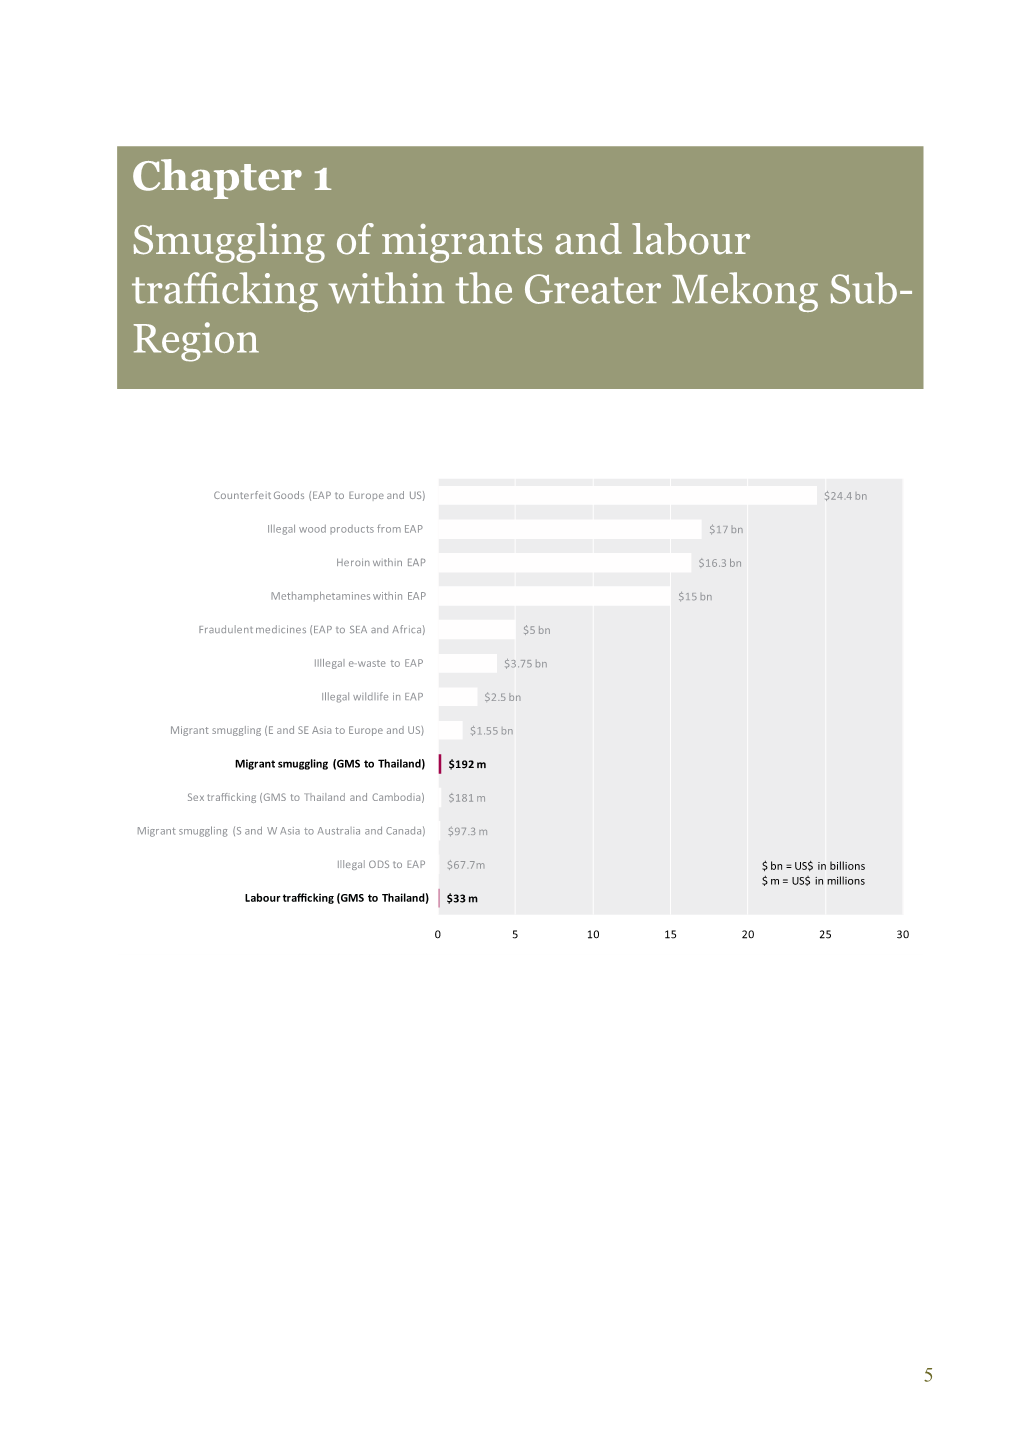 Chapter 1 Smuggling of Migrants and Labour Trafficking Within the Greater